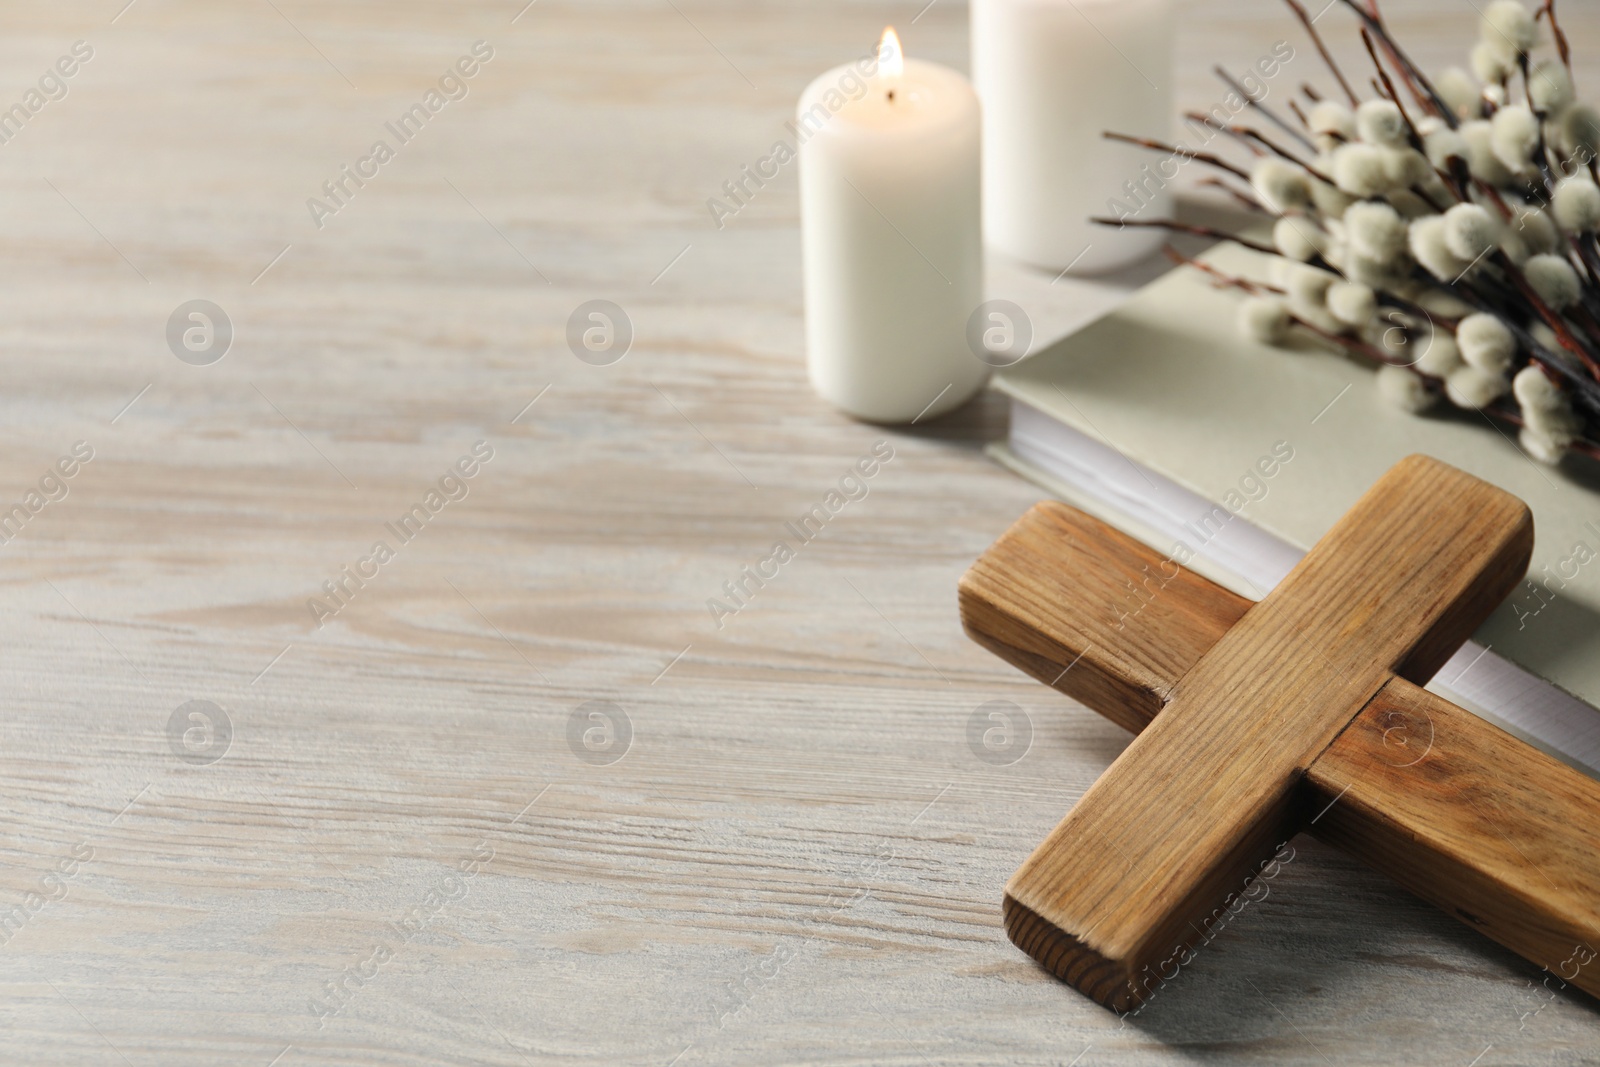 Photo of Burning candles, cross, book and willow branches on wooden table. Space for text